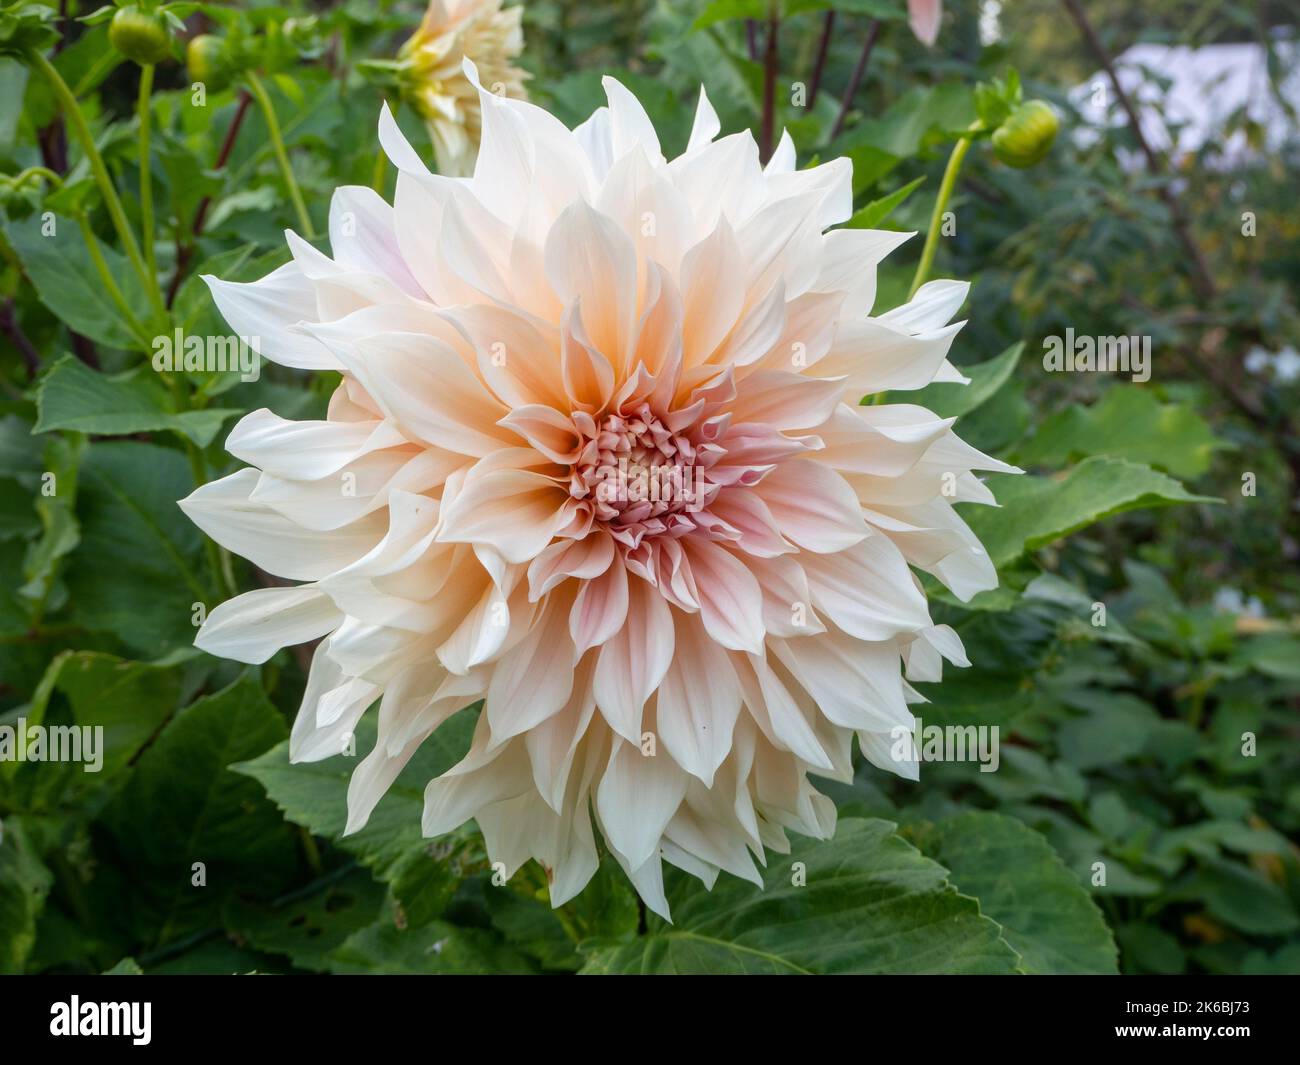 Chenies Manor Garden Dahlias in October.Detail of a single decorative Dahlia 'Cafe au Lait' with perfect petals in a warm cream tone. Stock Photo